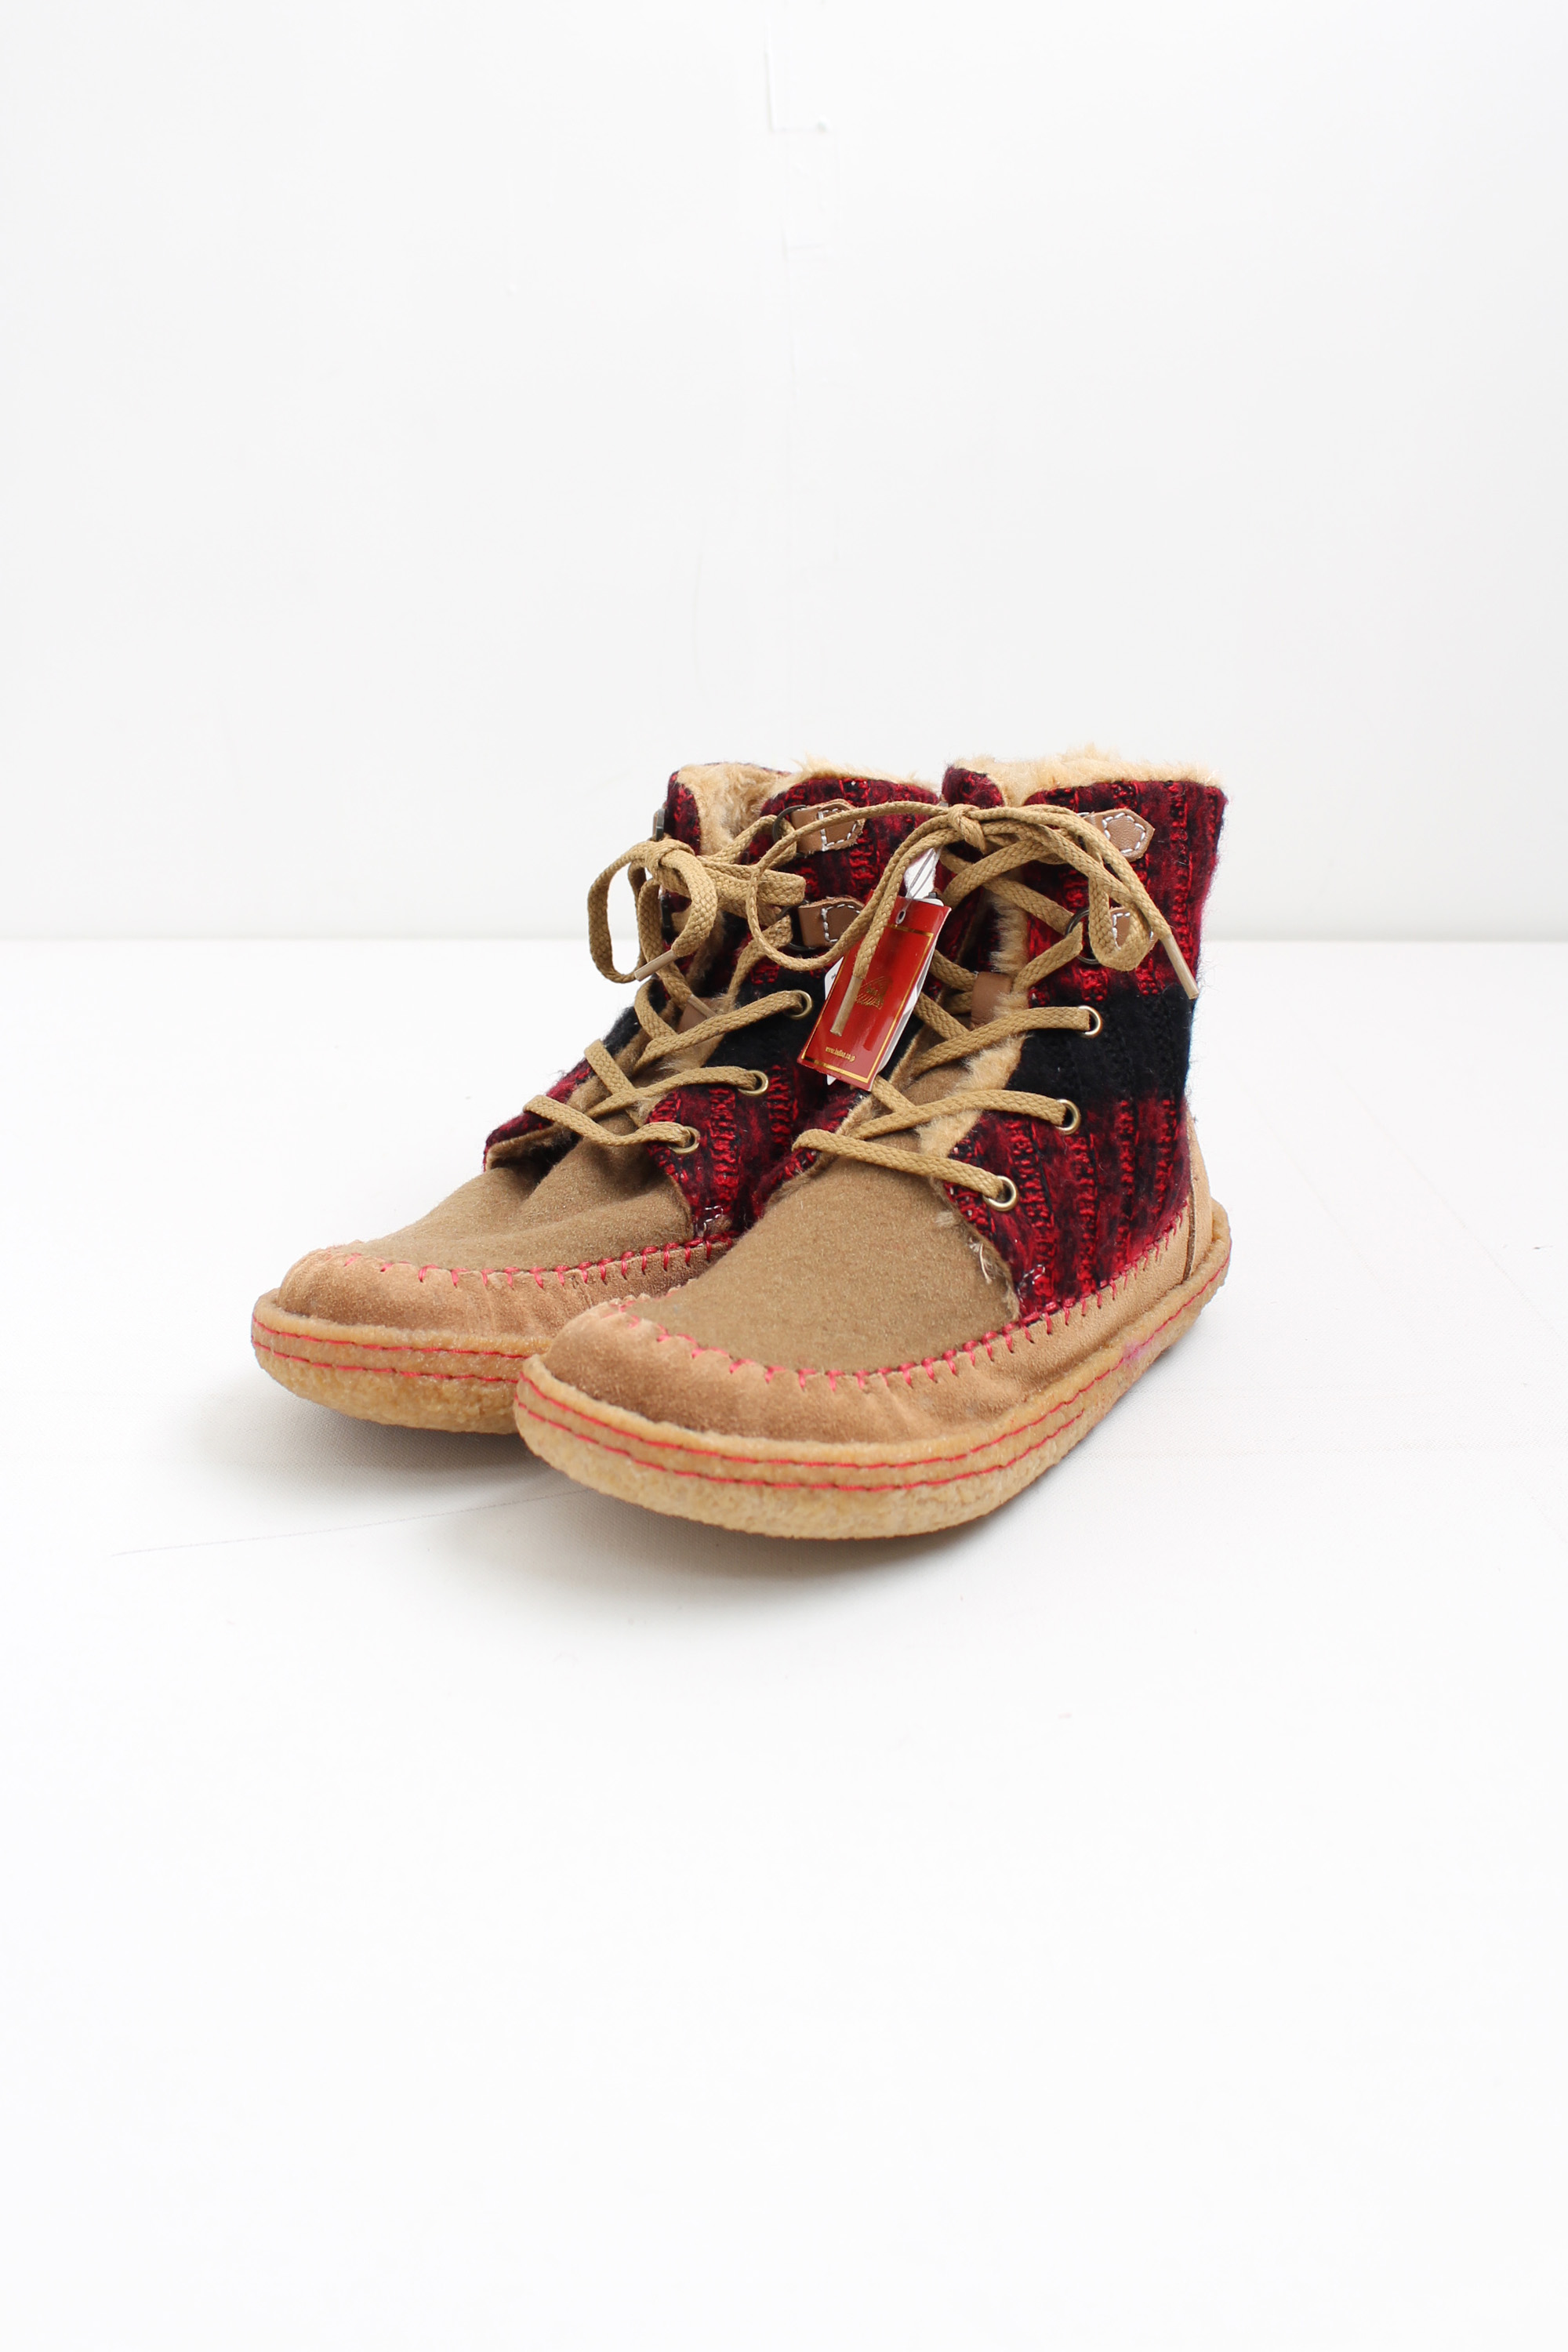 INDIAN native boots